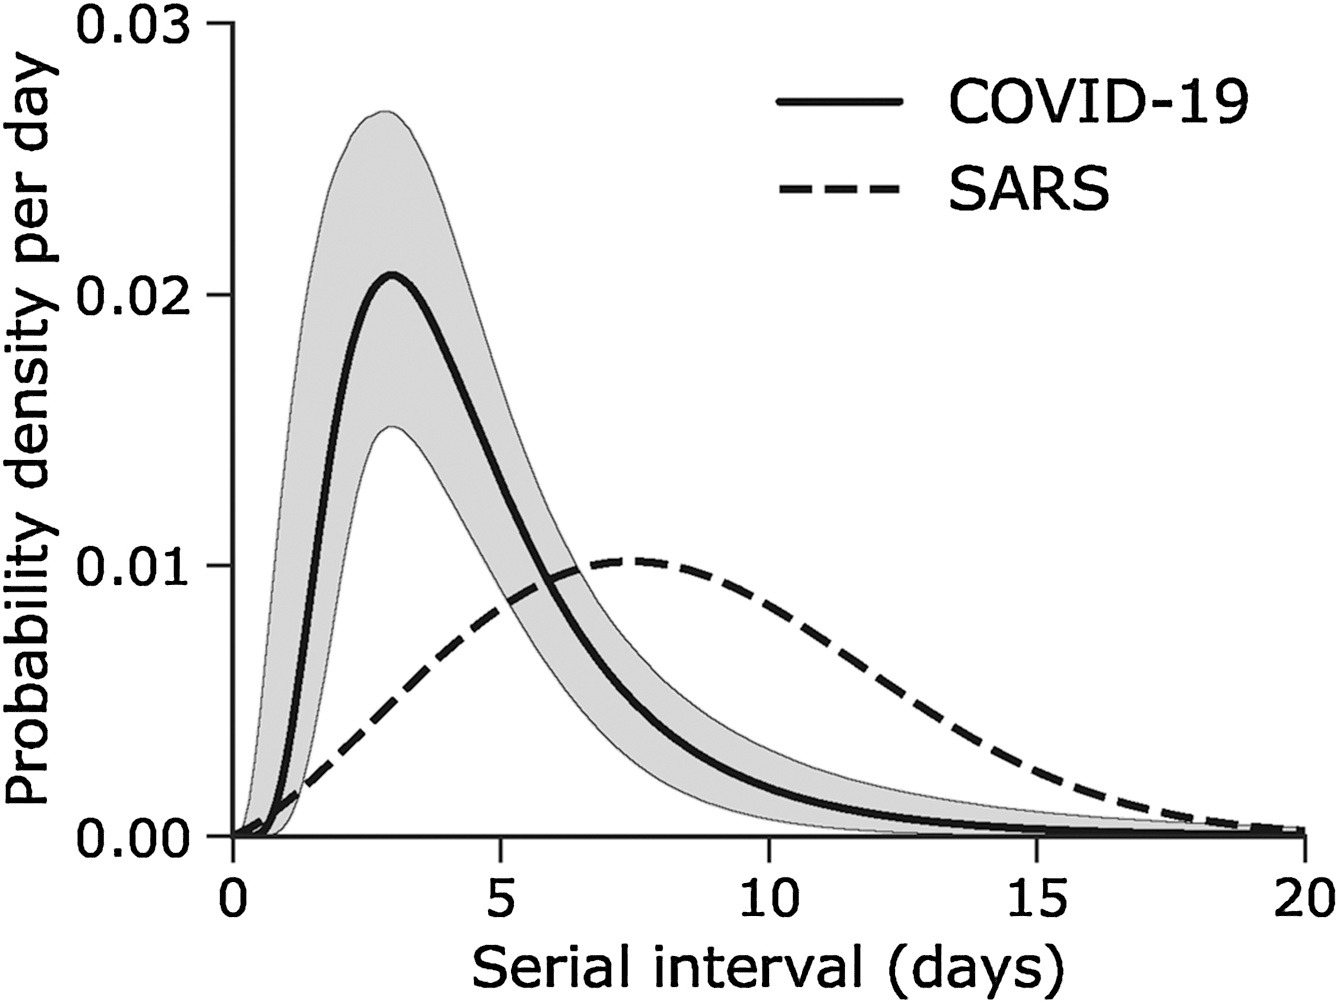 Serial interval of novel coronavirus (COVID-19) infections overlaid with a published distribution of SARS. (Nishiura et al., 2020)